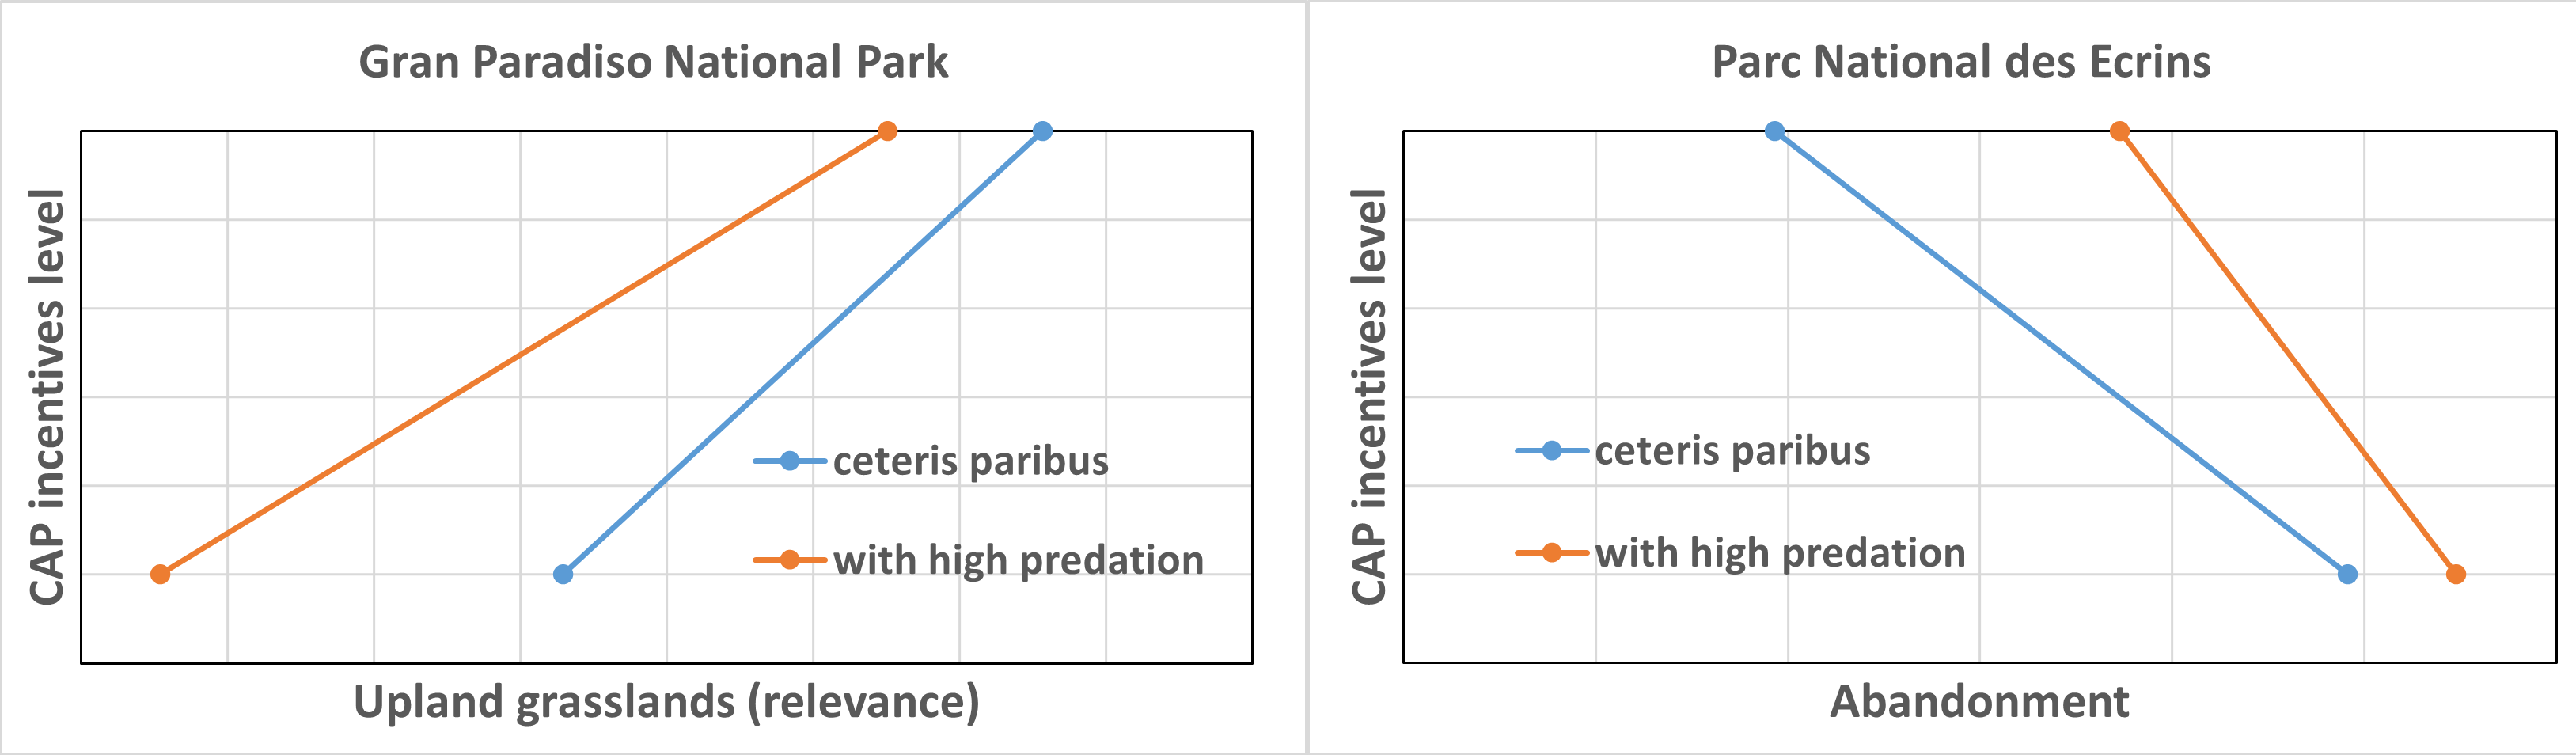 Potential abandonment trends resulting from different CAP incentive levels and predation effect in the two case study areas. CAP incentives are effective in maintaining the utilization of grasslands. However, the impact of predation as a driver of abandonment is clearly outlined.